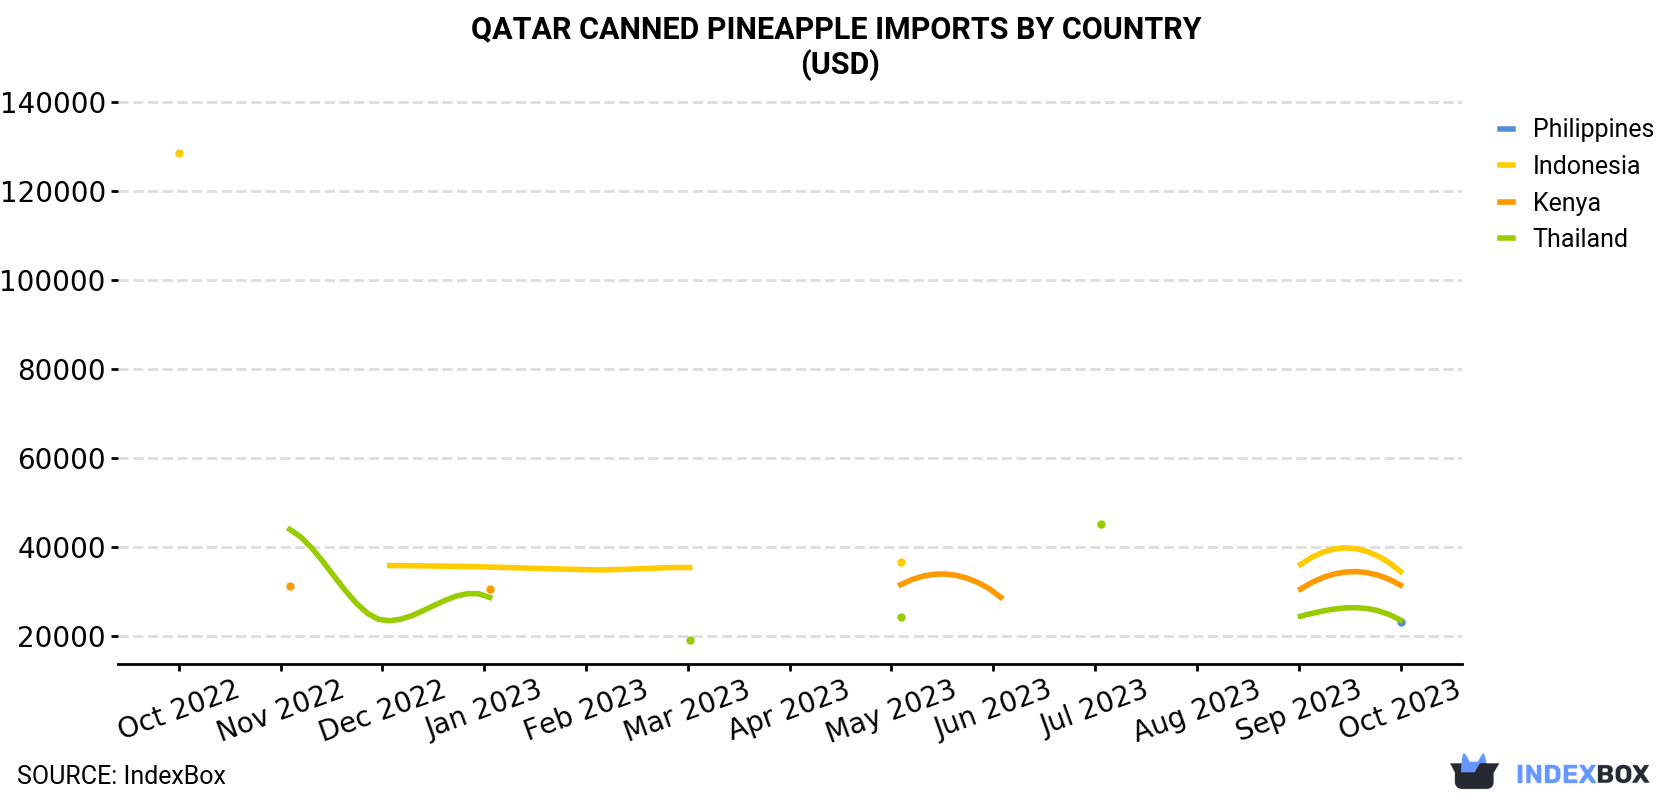 Qatar Canned Pineapple Imports By Country (USD)